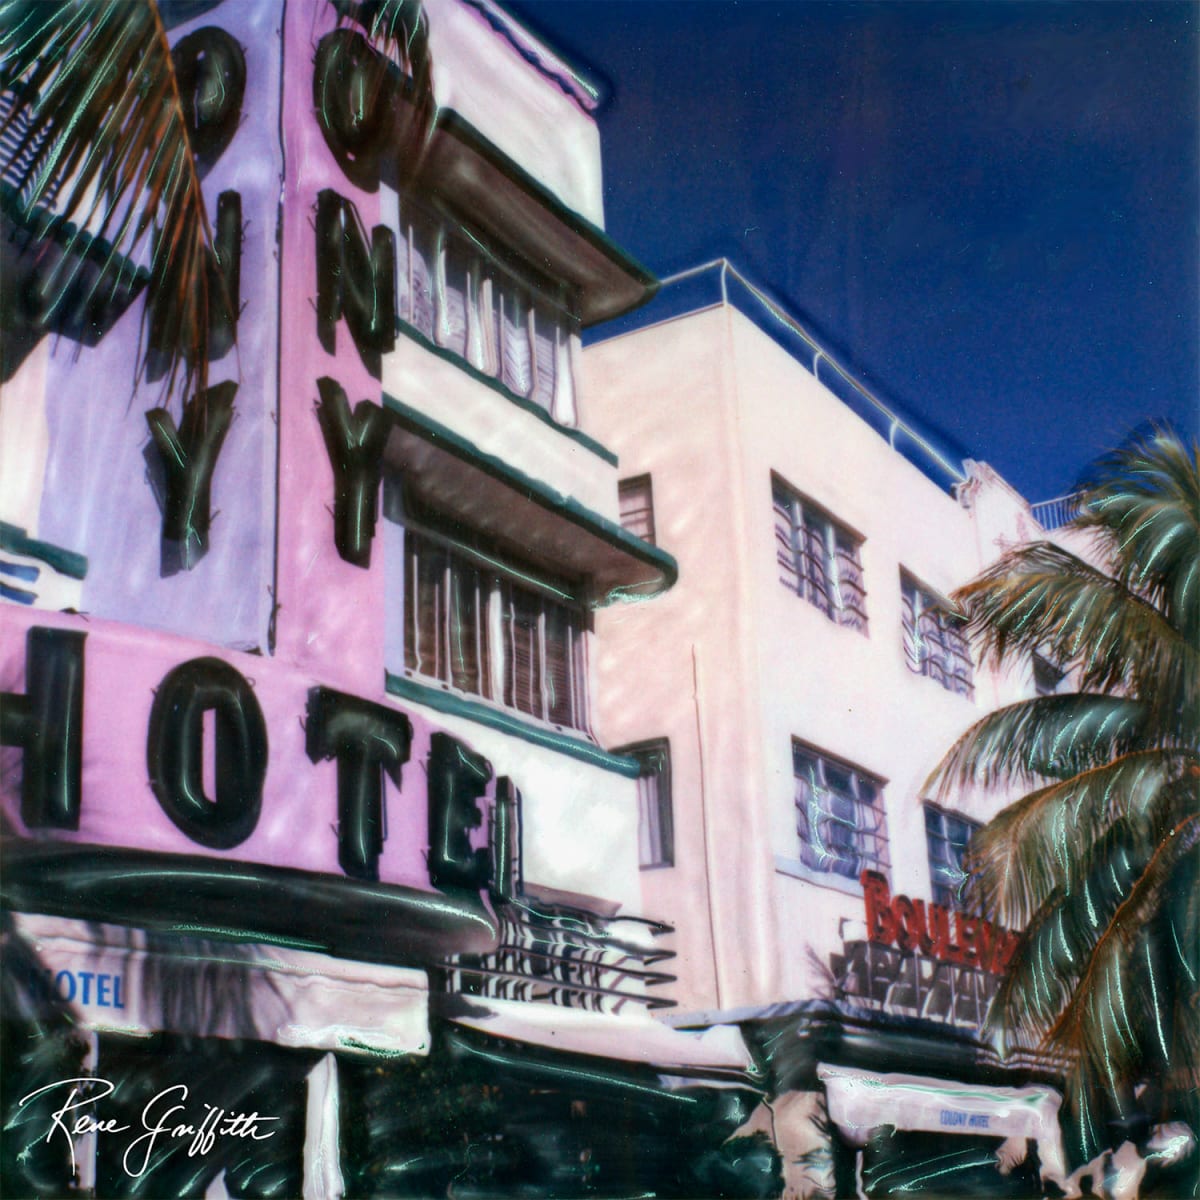 Colony Hotel by Rene Griffith 